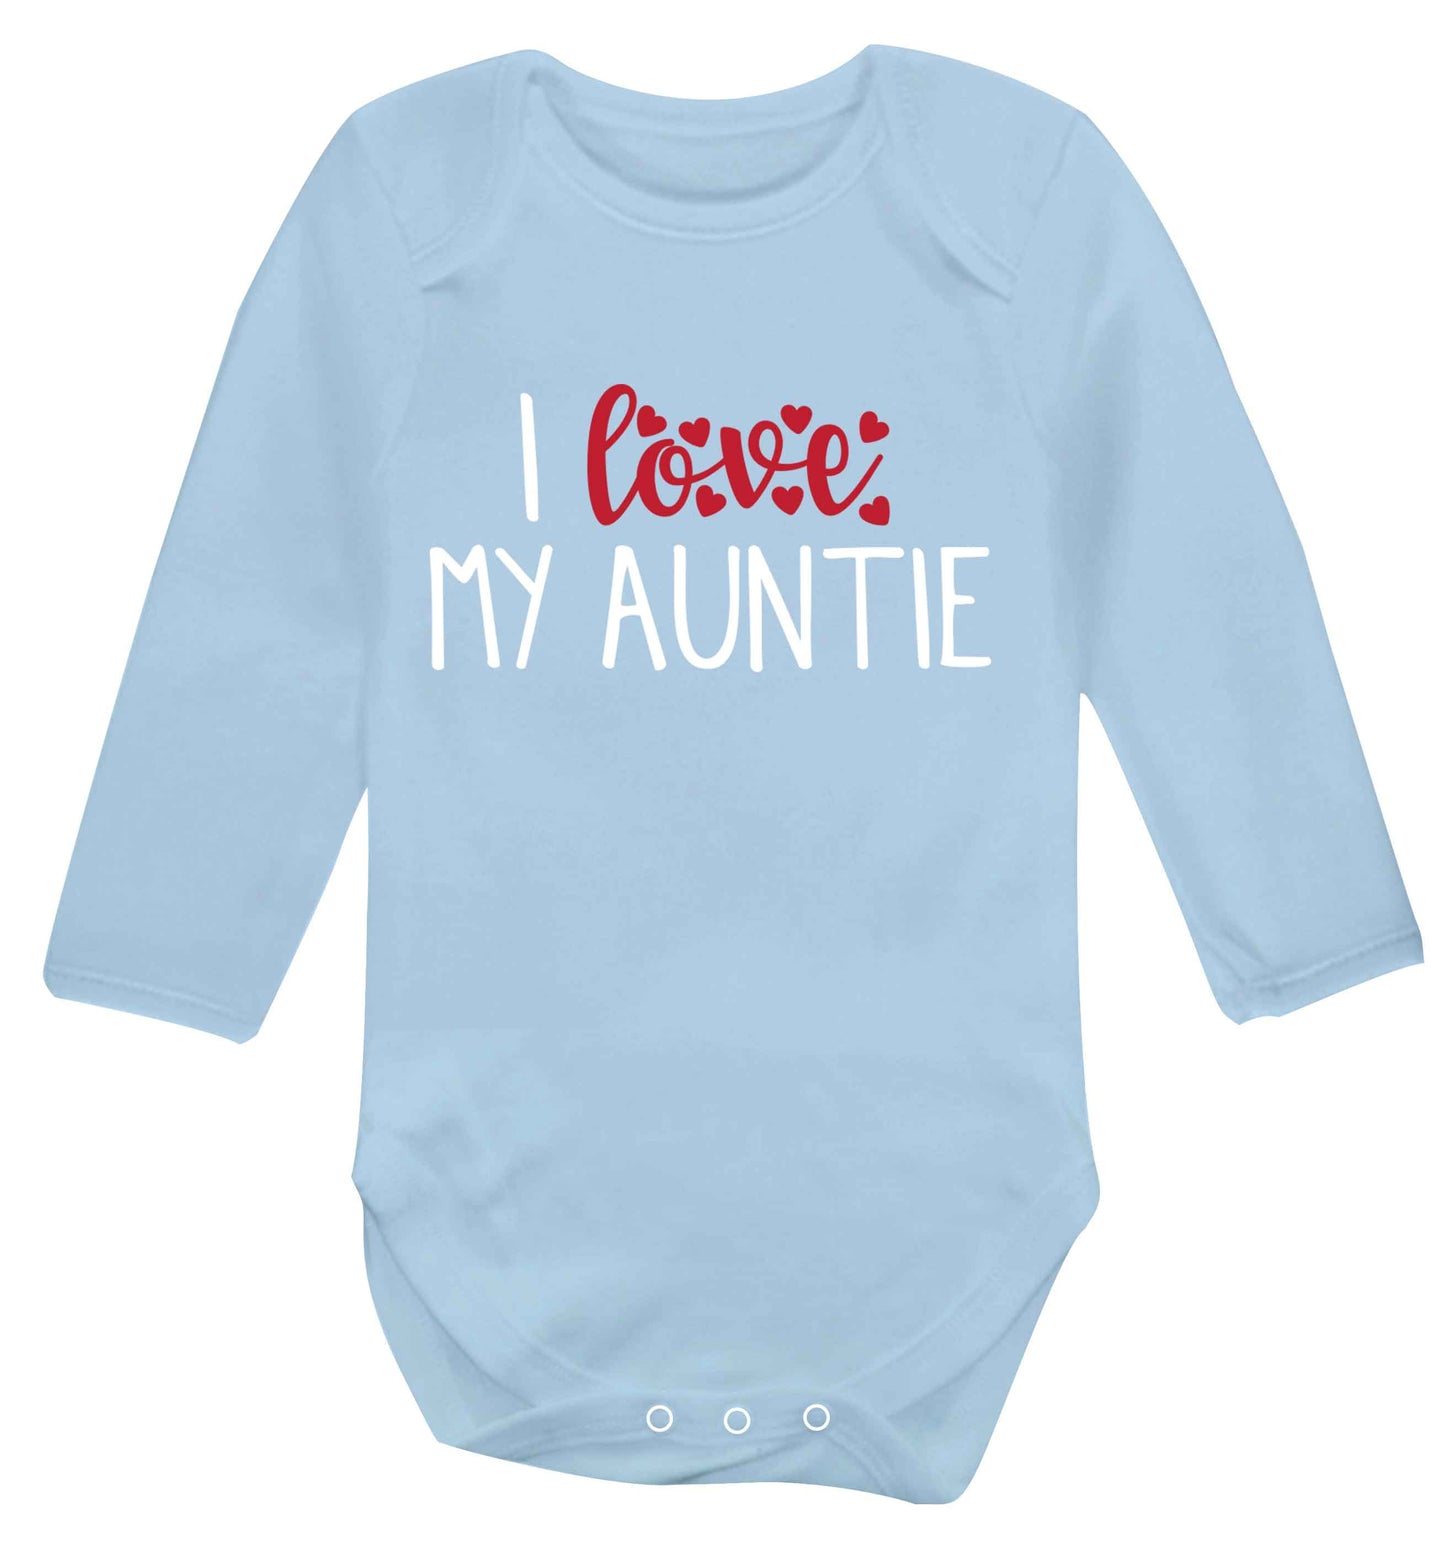 I love my auntie Baby Vest long sleeved pale blue 6-12 months